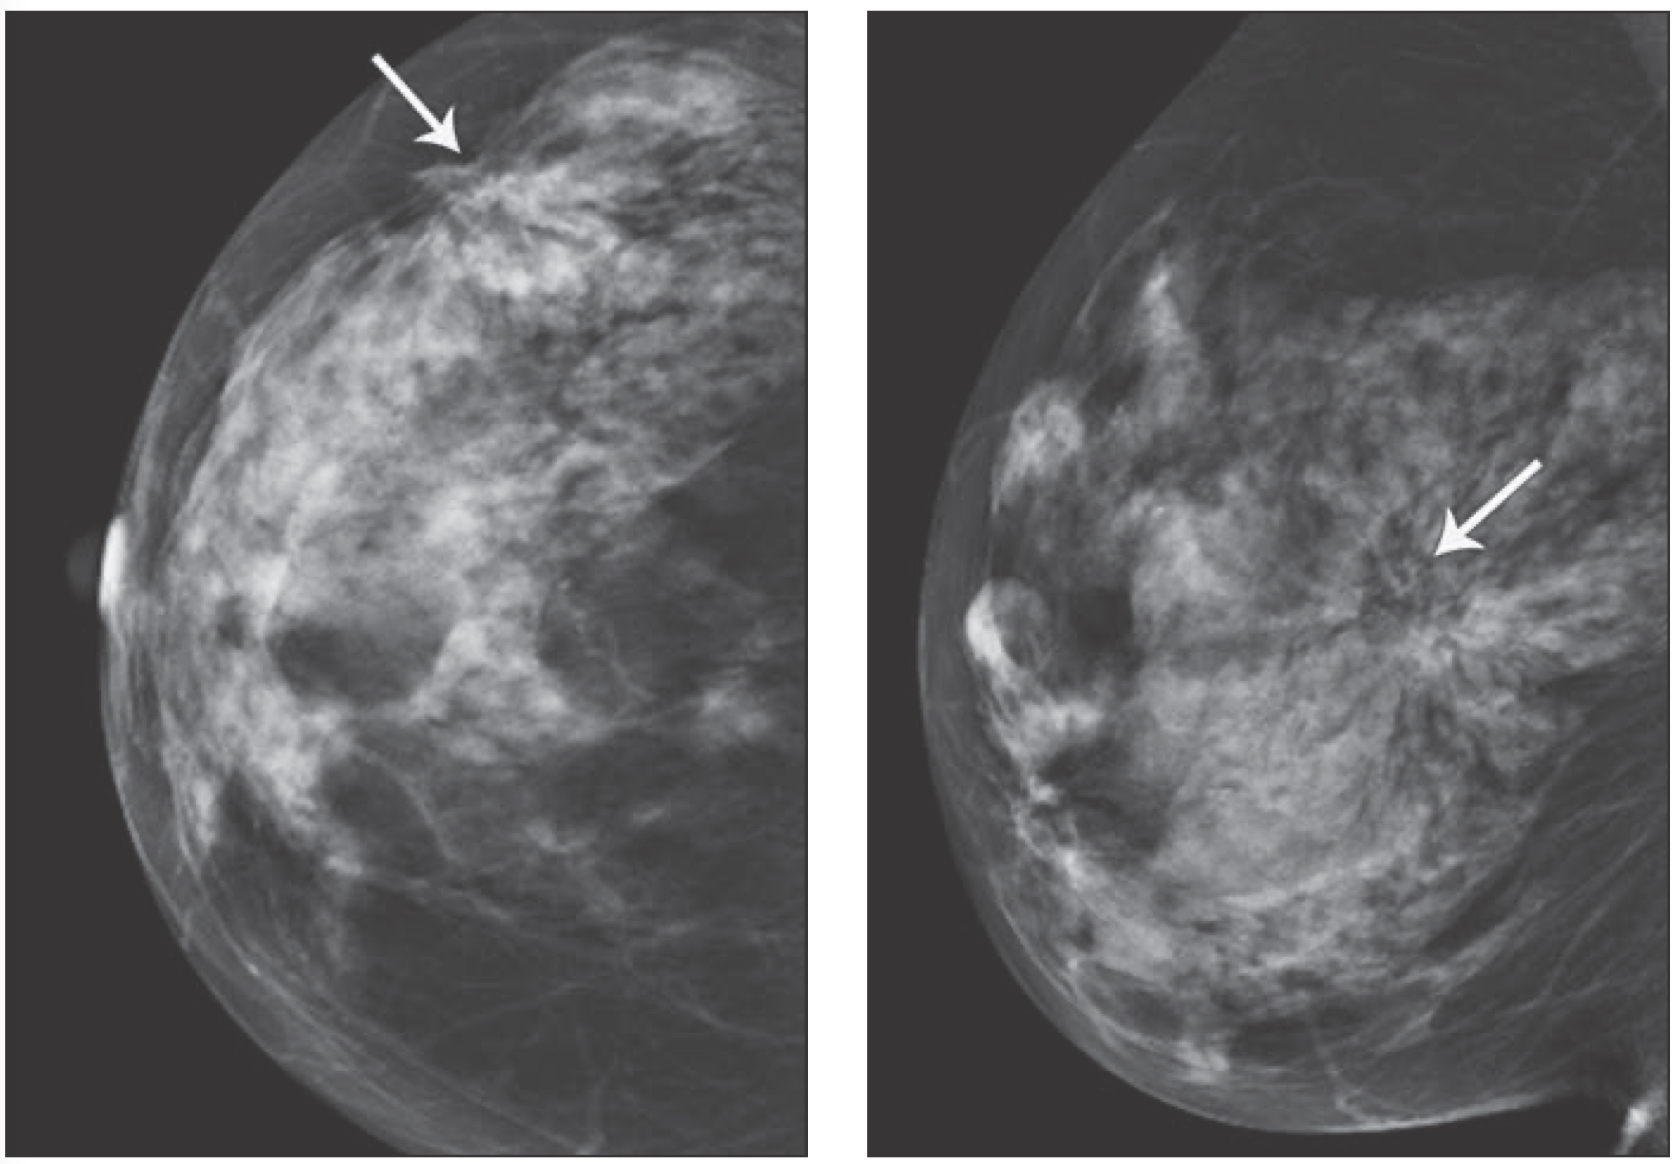 3-D breast area and breast area difference (BAD) calculation in cm 2 on